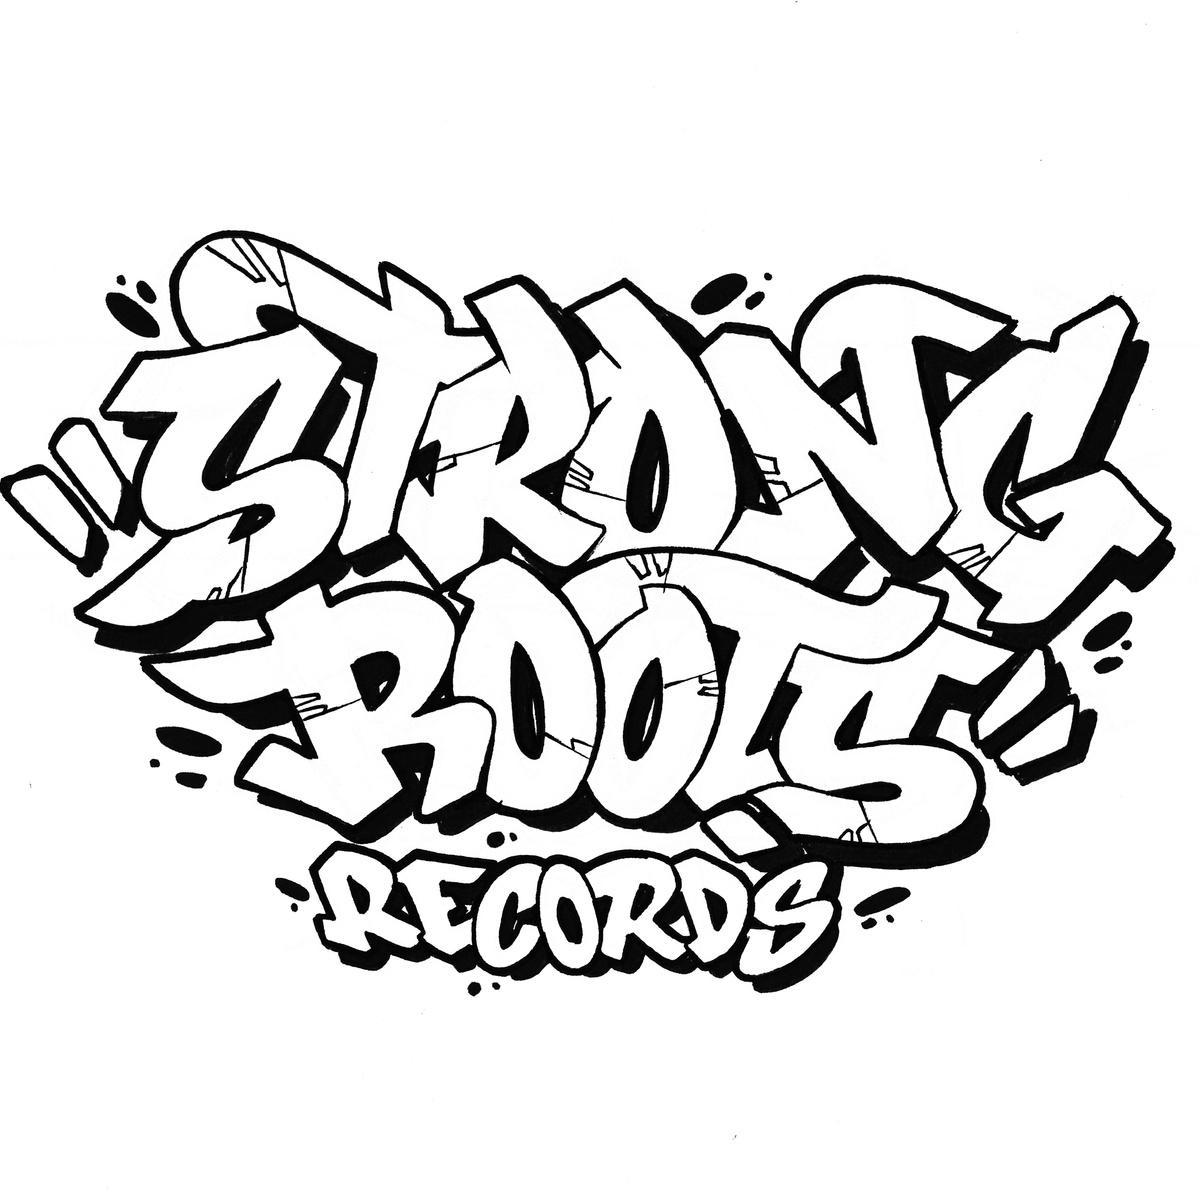 BDTB Presents: Day 6 of 32 Days of Chreece: Strong Roots Records | @ChreeceAF @StrongRootsRecs